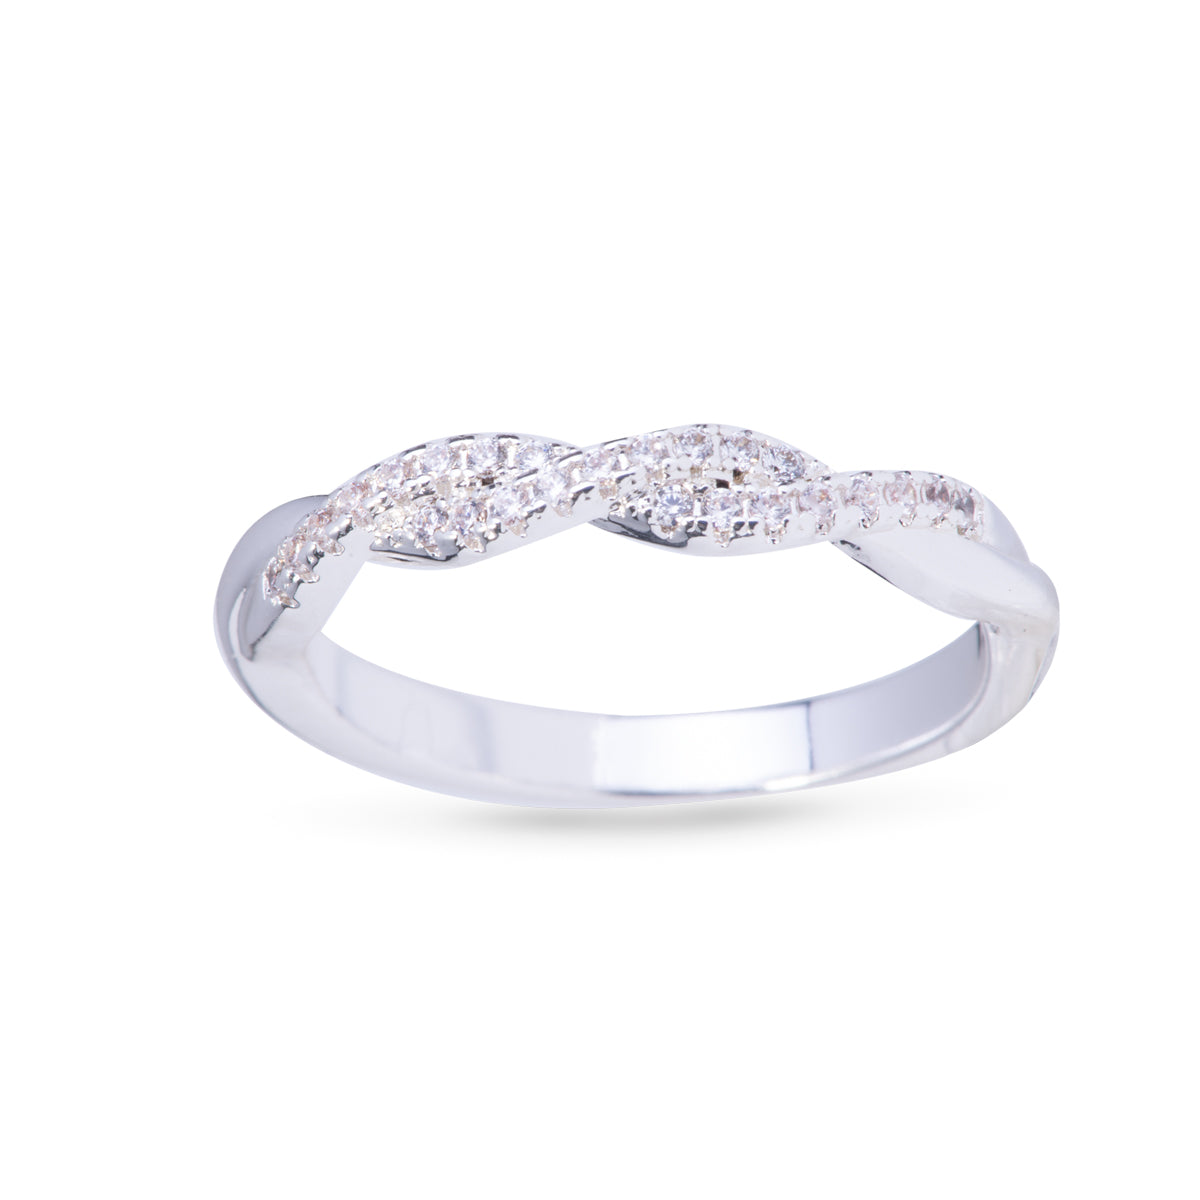 Braided CZ Ring - Size 9